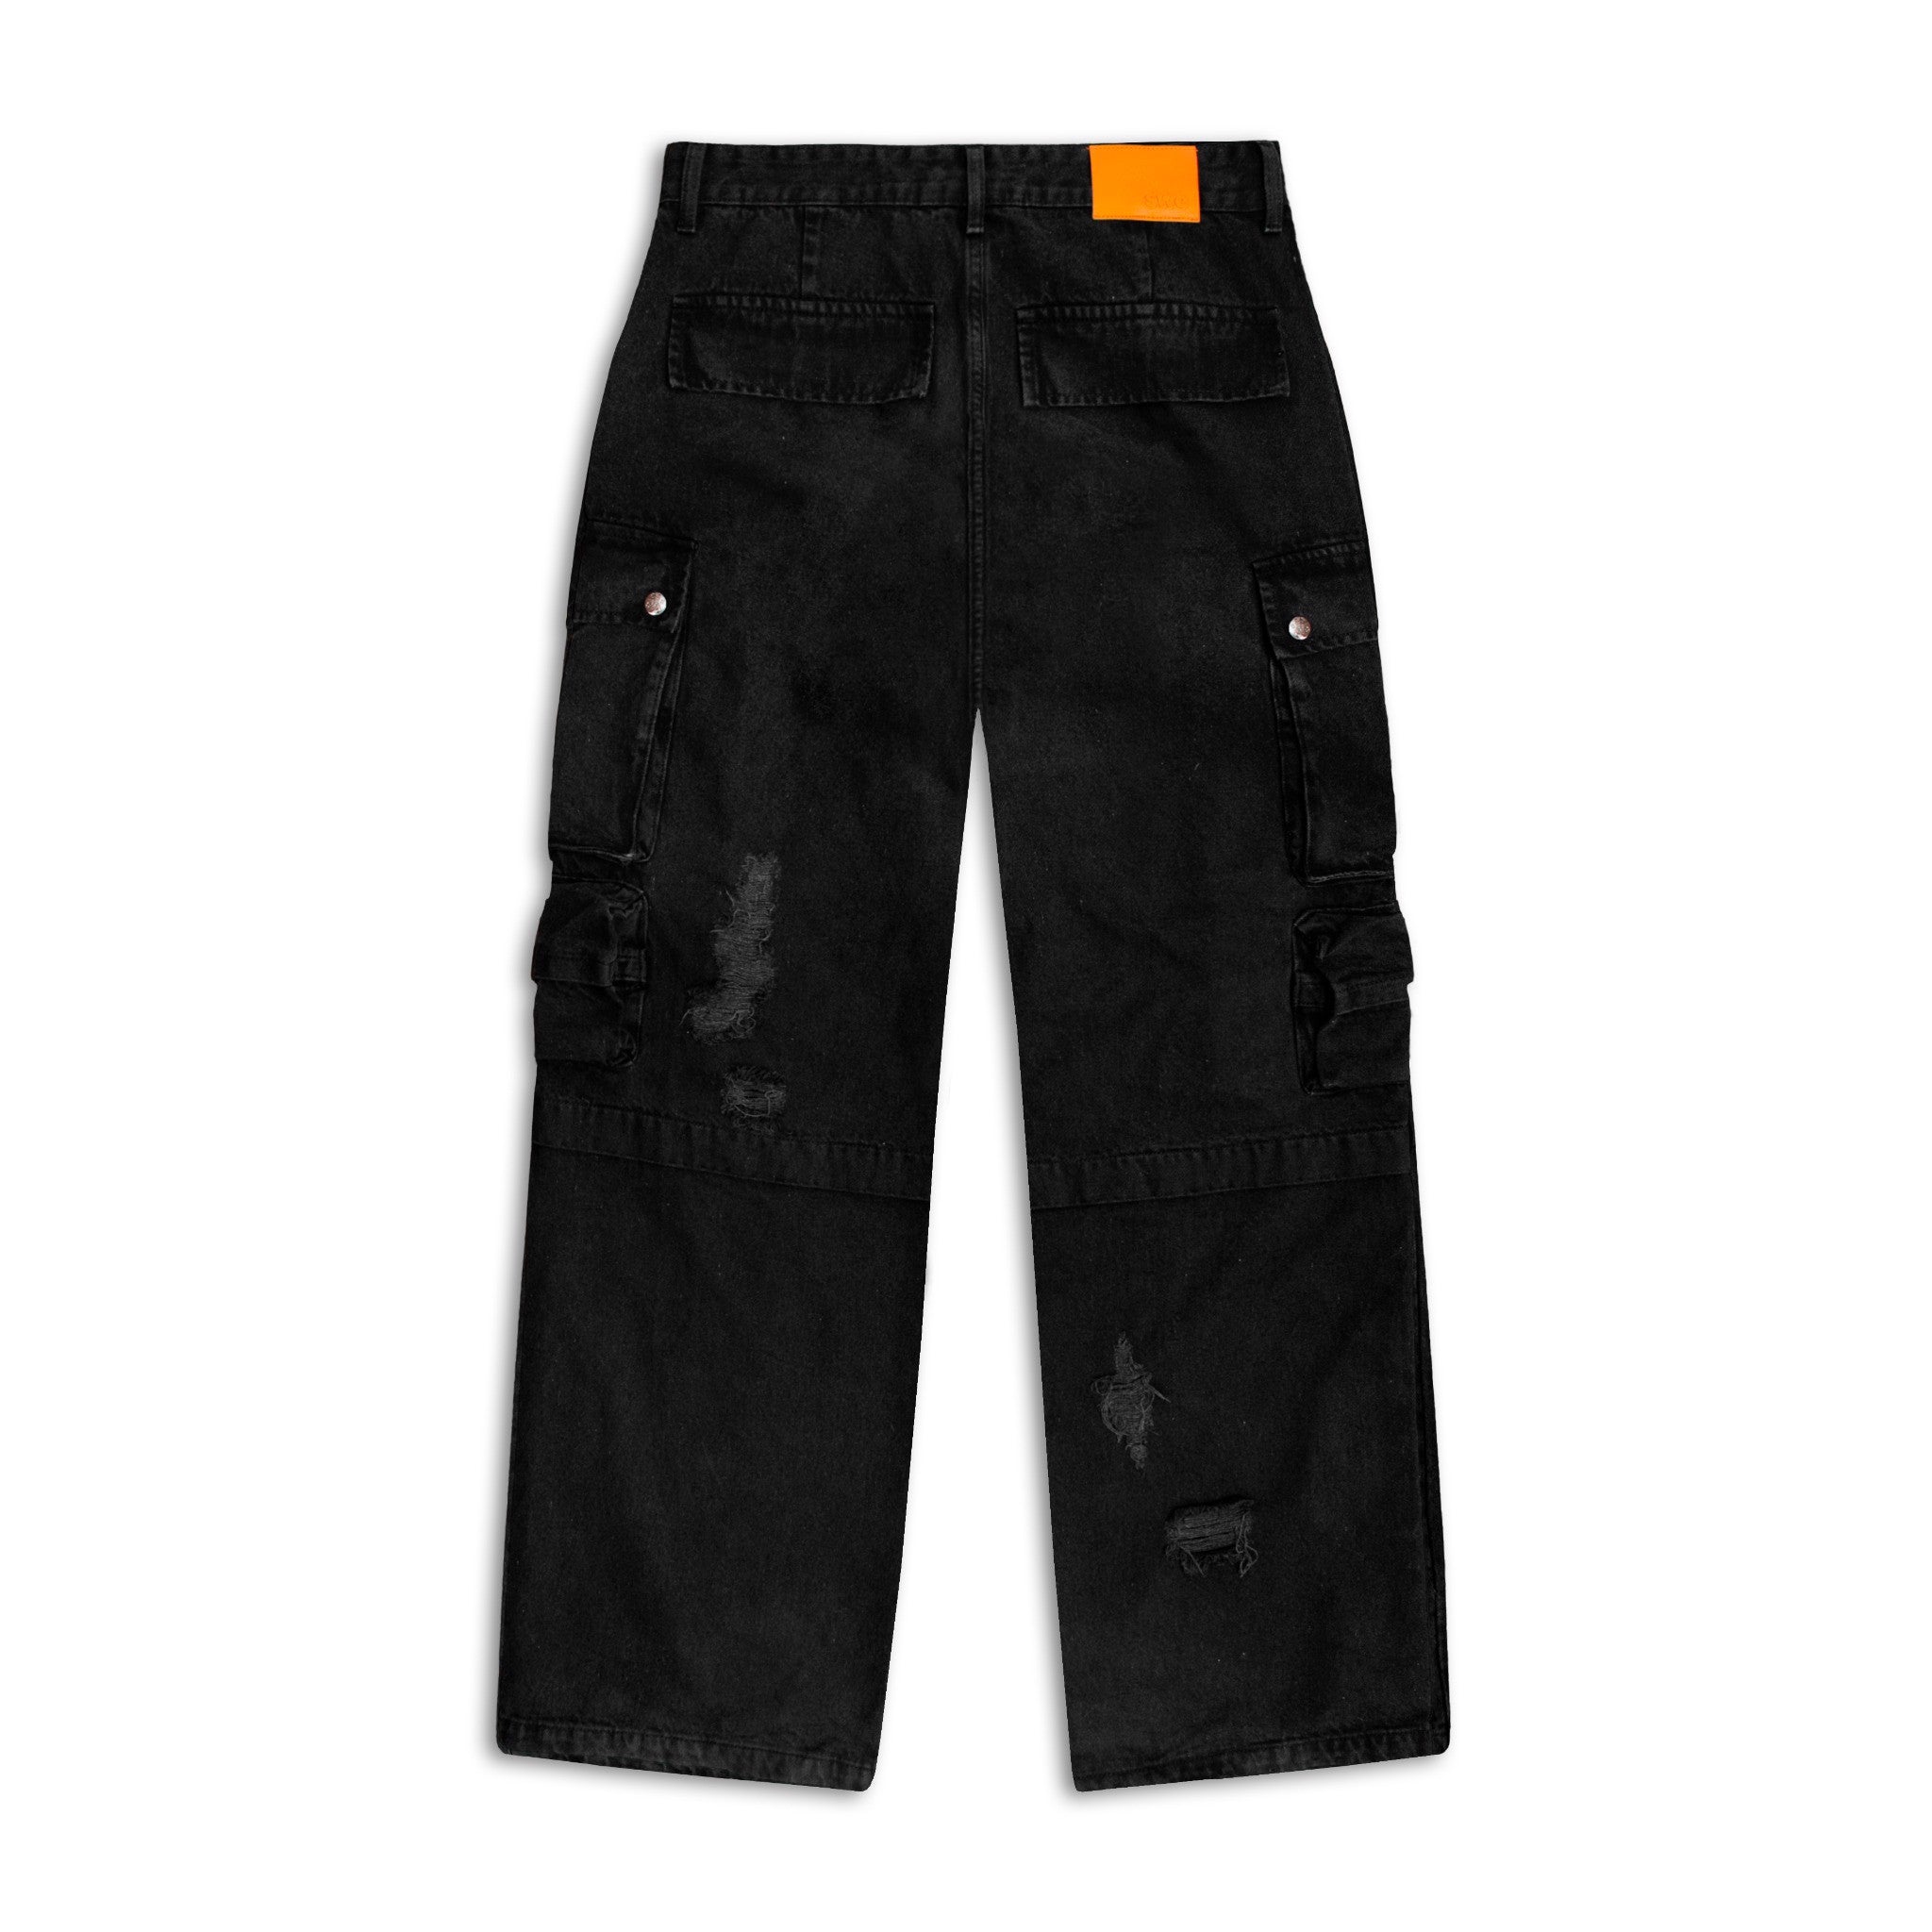 RIPPED CARGO JEANS - BLACK